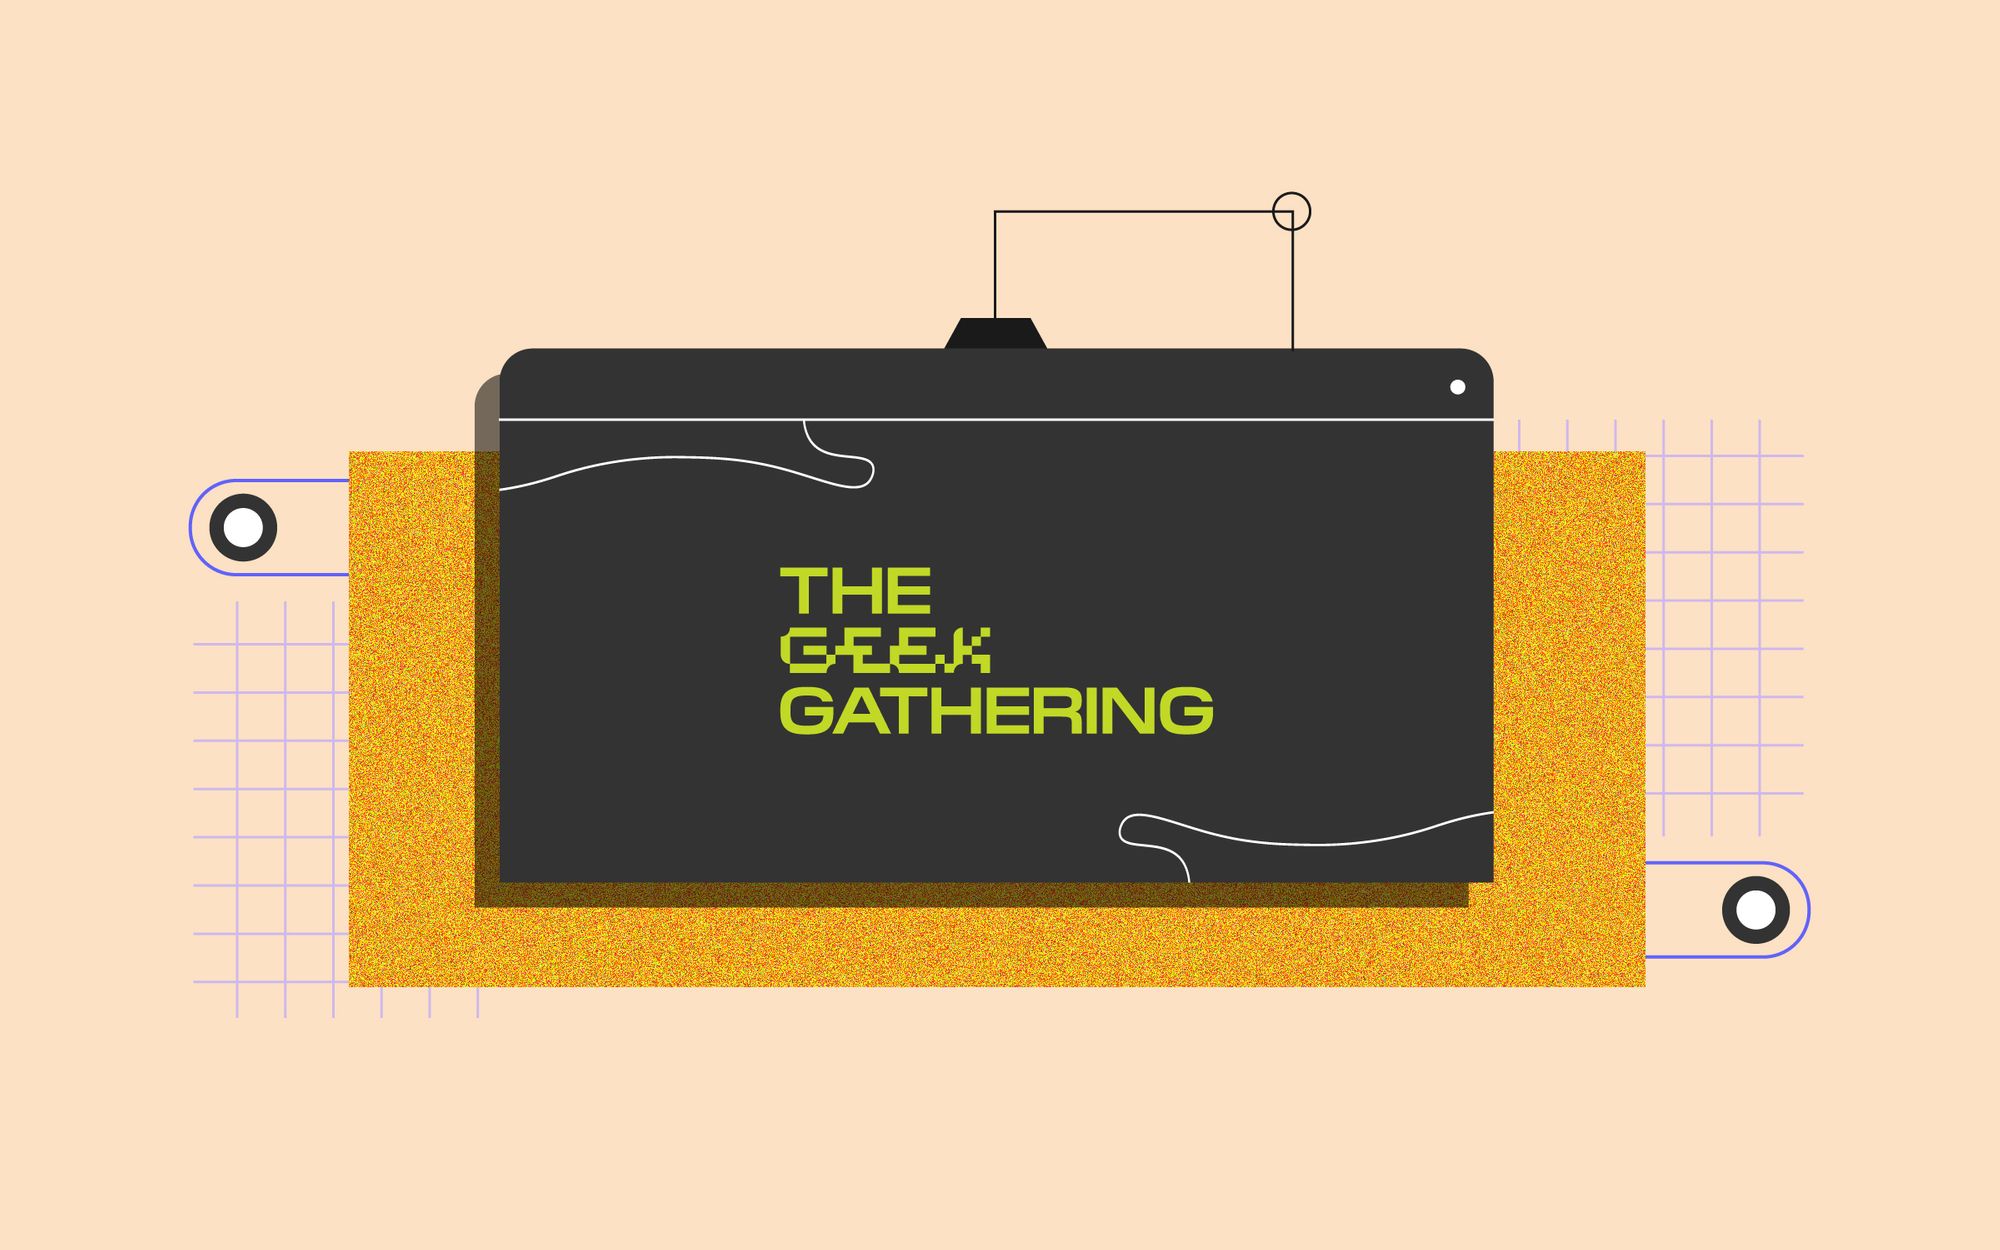 The Geek Gathering is back!